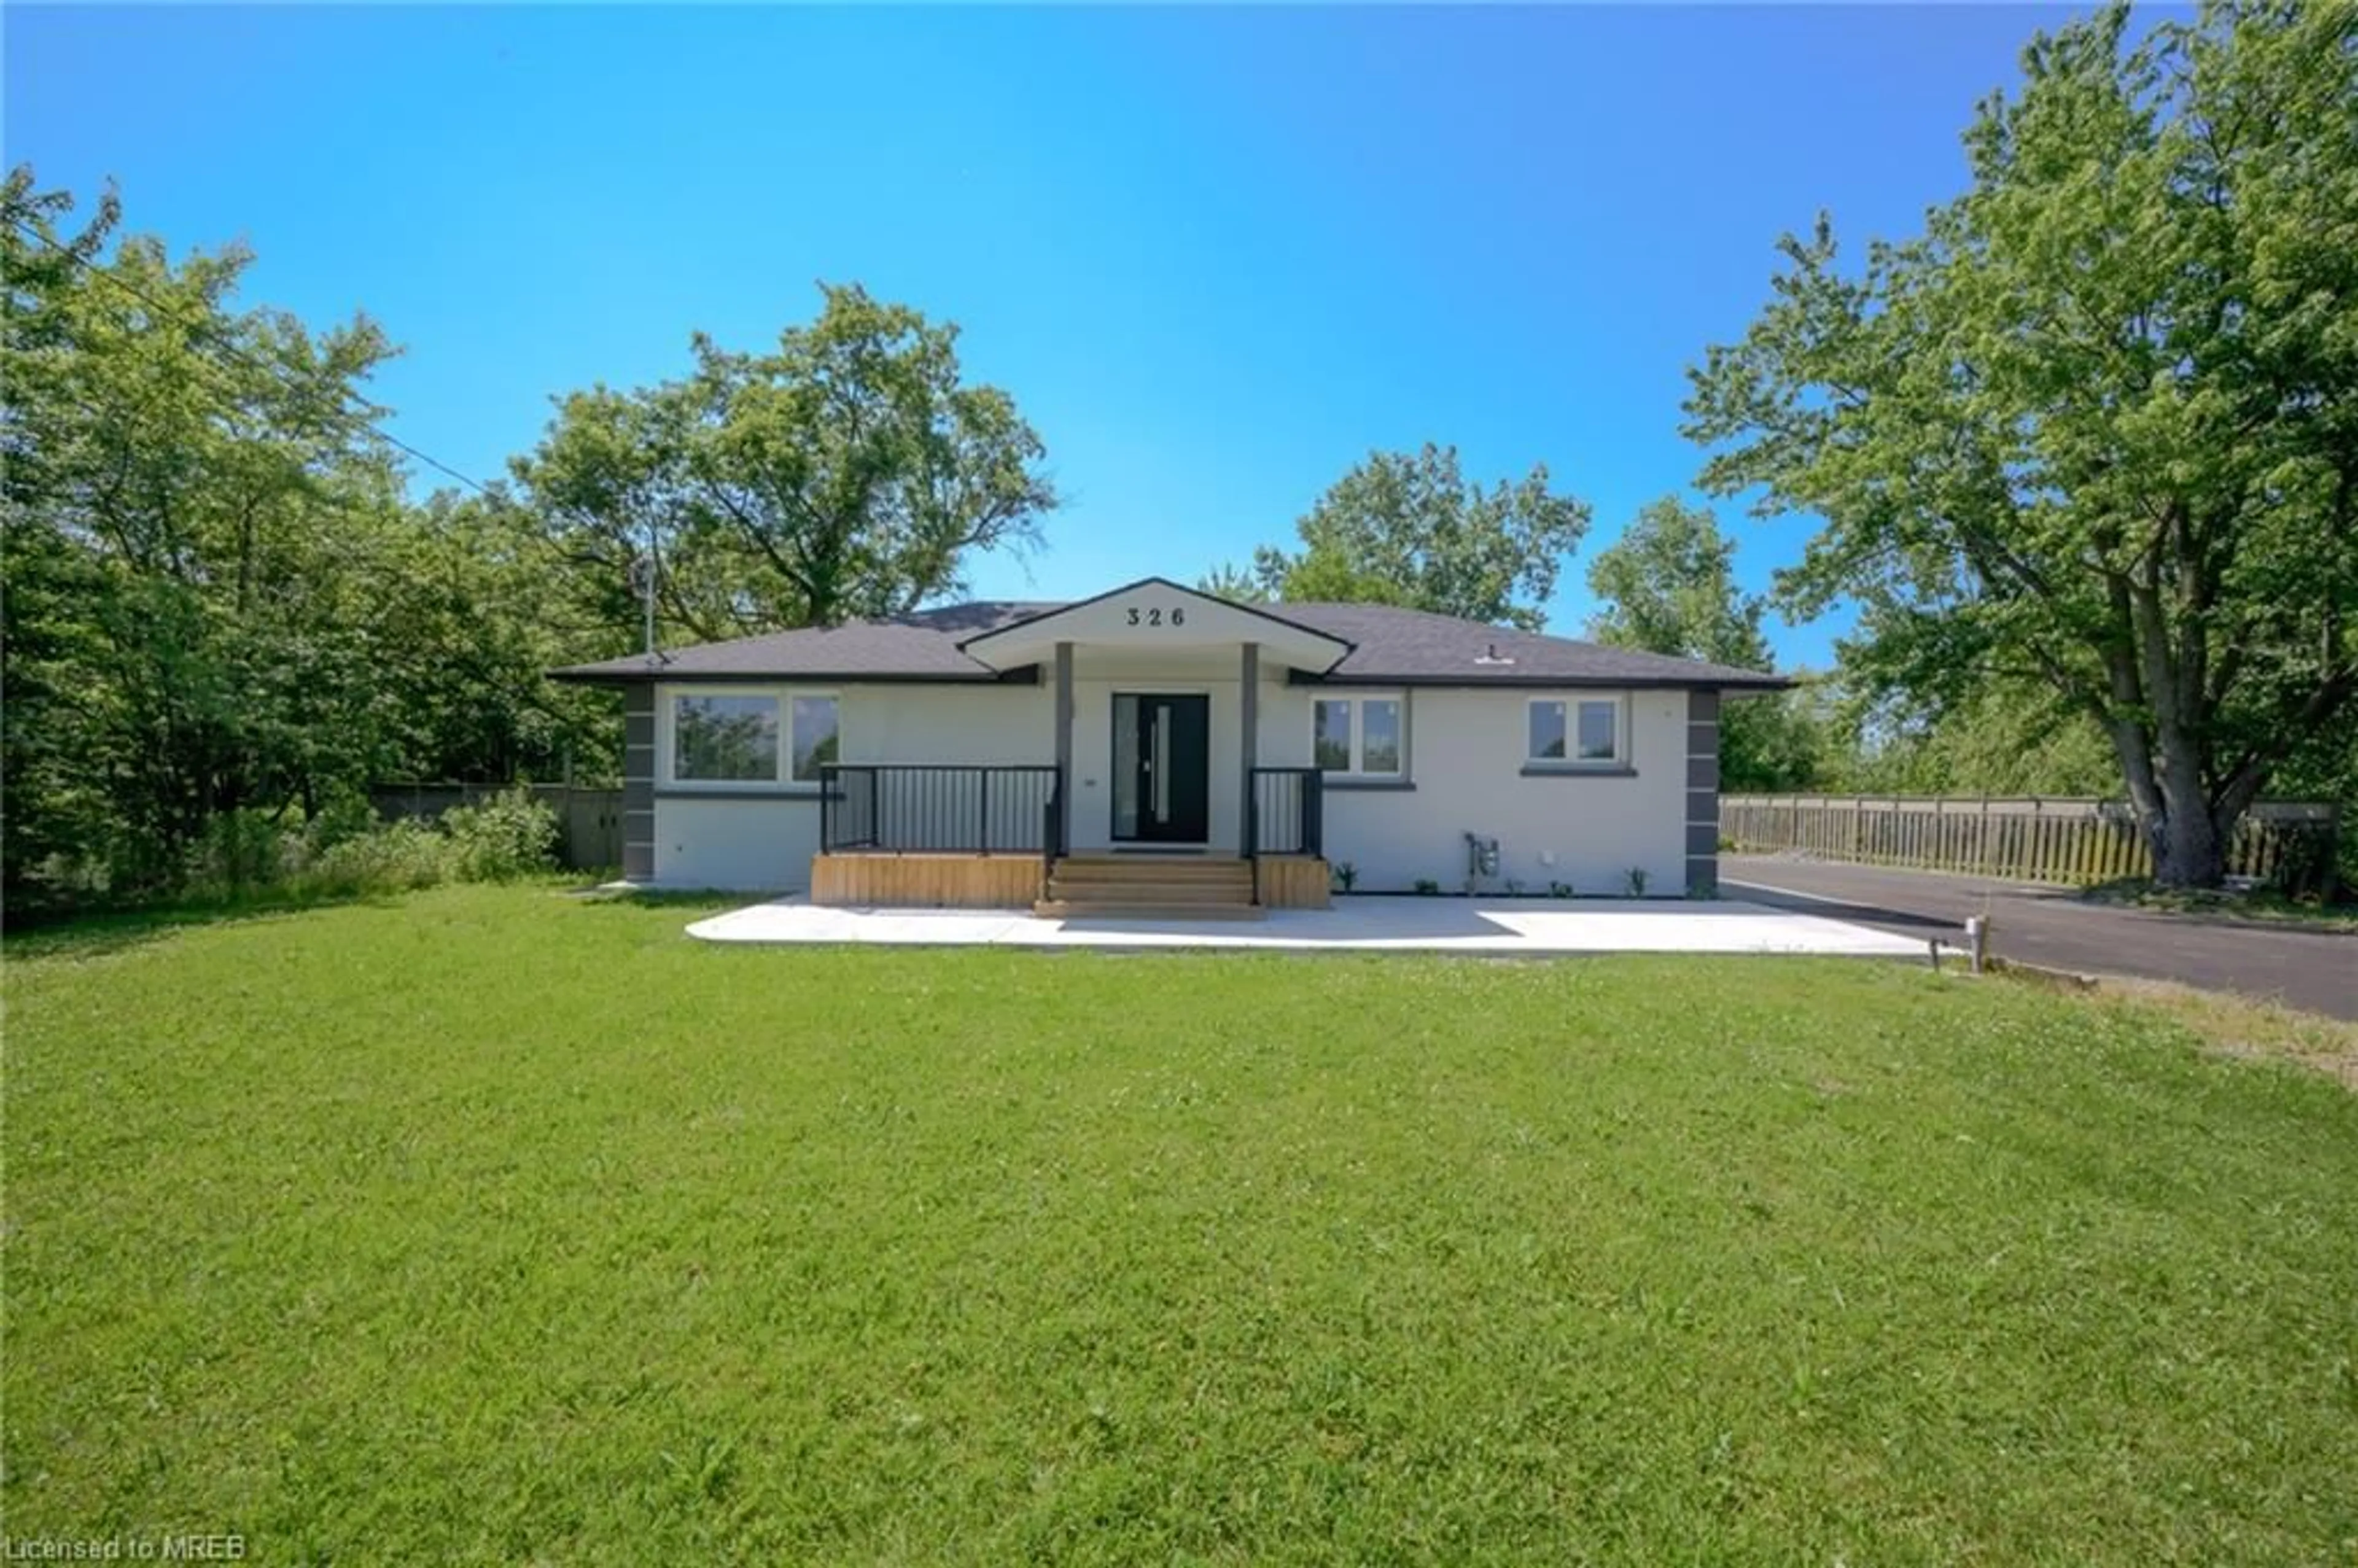 Frontside or backside of a home for 326 Mountain Rd, Grimsby Ontario L3M 4R7